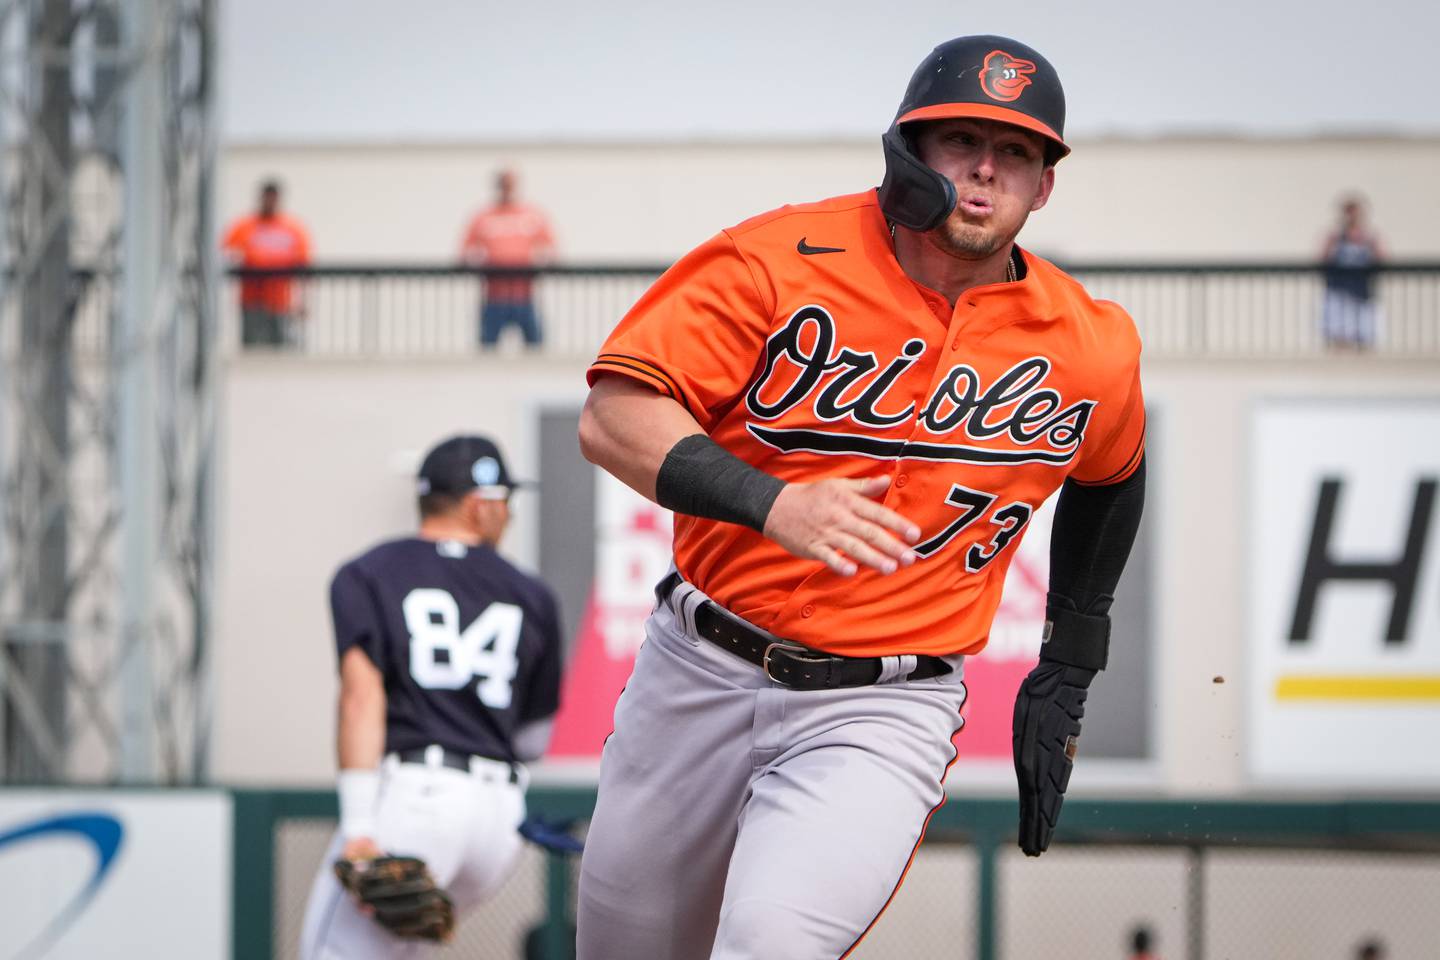 César Prieto (73) runs to third base following a double by Ryan O’Hearn in the sixth inning of a game against the Tigers on 3/2/23. The Baltimore Orioles lost to the Detroit Tigers, 10-3, in the Florida Grapefruit League matchup.